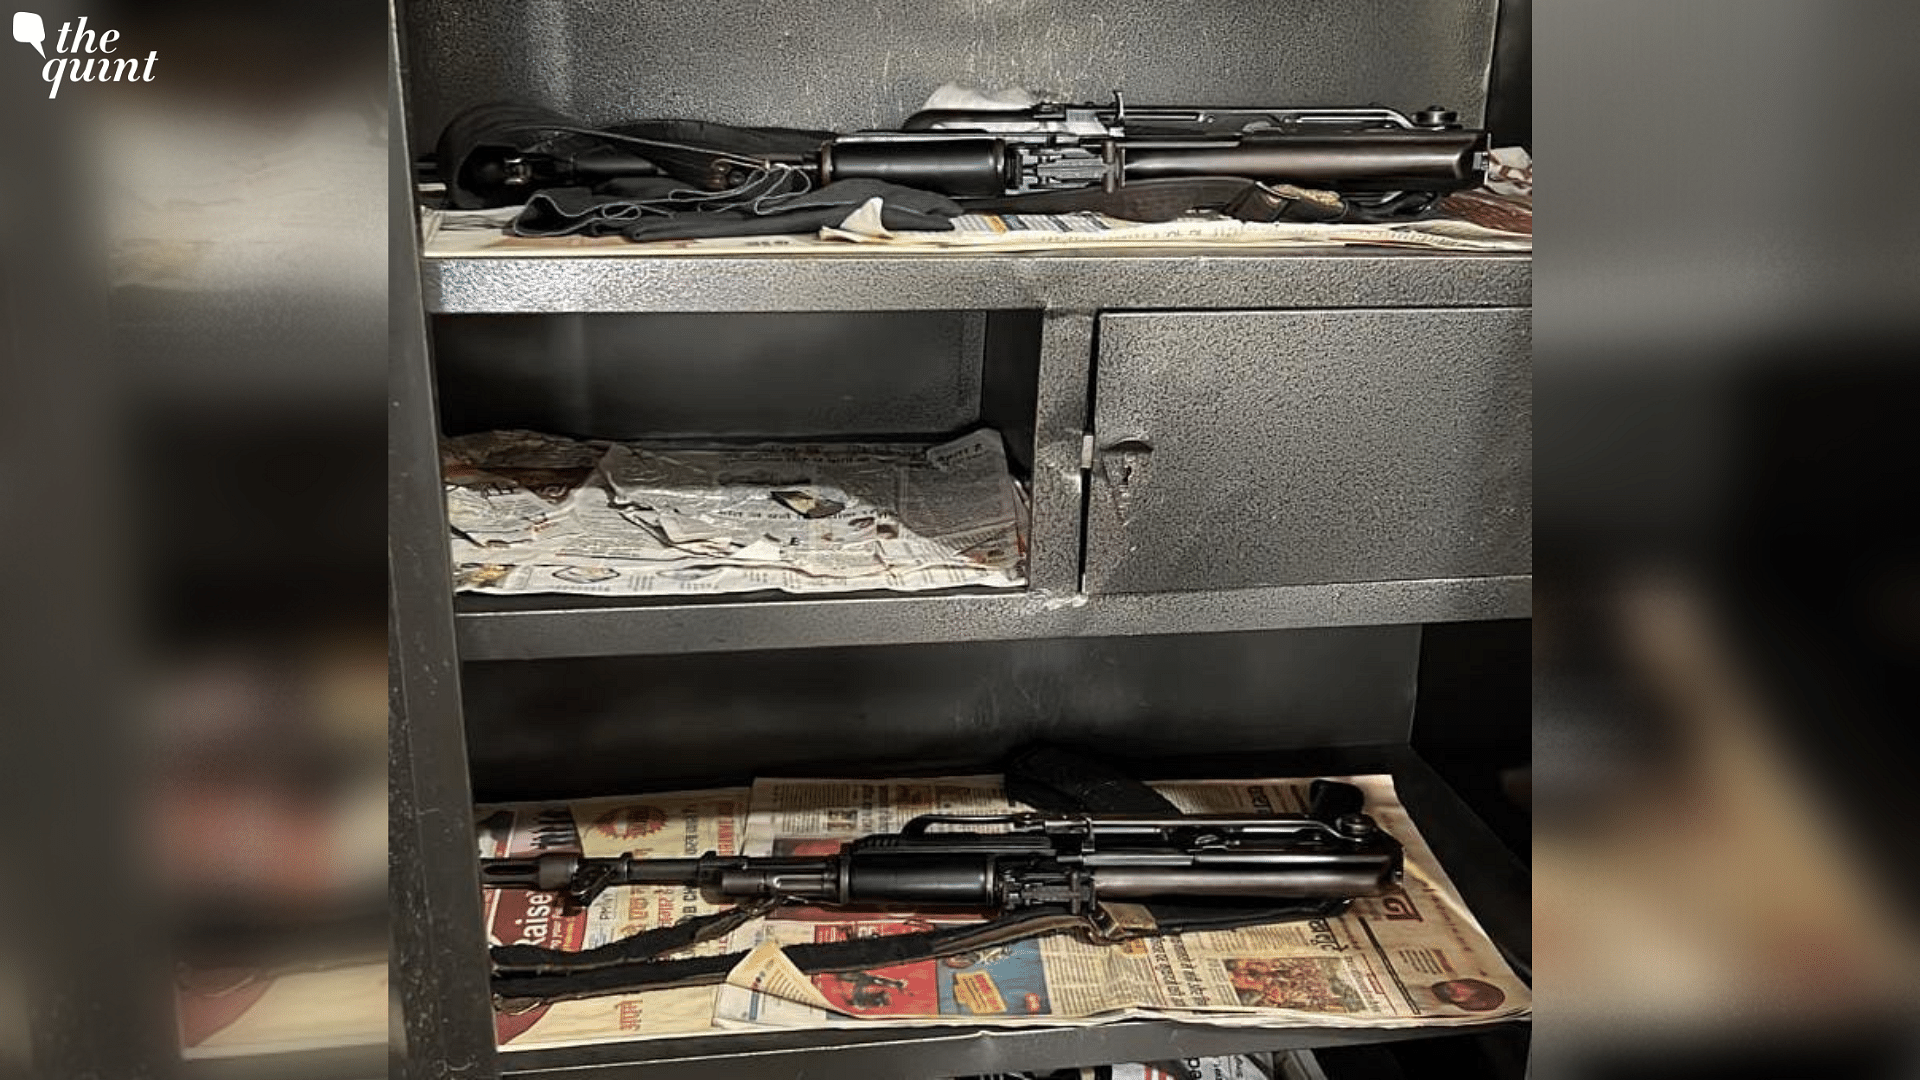 <div class="paragraphs"><p>The <a href="https://www.thequint.com/topic/enforcement-directorate">Enforcement Directorate</a> (ED) raided multiple locations in Ranchi on Wednesday, 24 August, and recovered 2 AK series assault rifles as part of its ongoing money-laundering investigation into alleged <a href="https://www.thequint.com/topic/illegal-mining">illegal mining</a> in the state.</p></div>